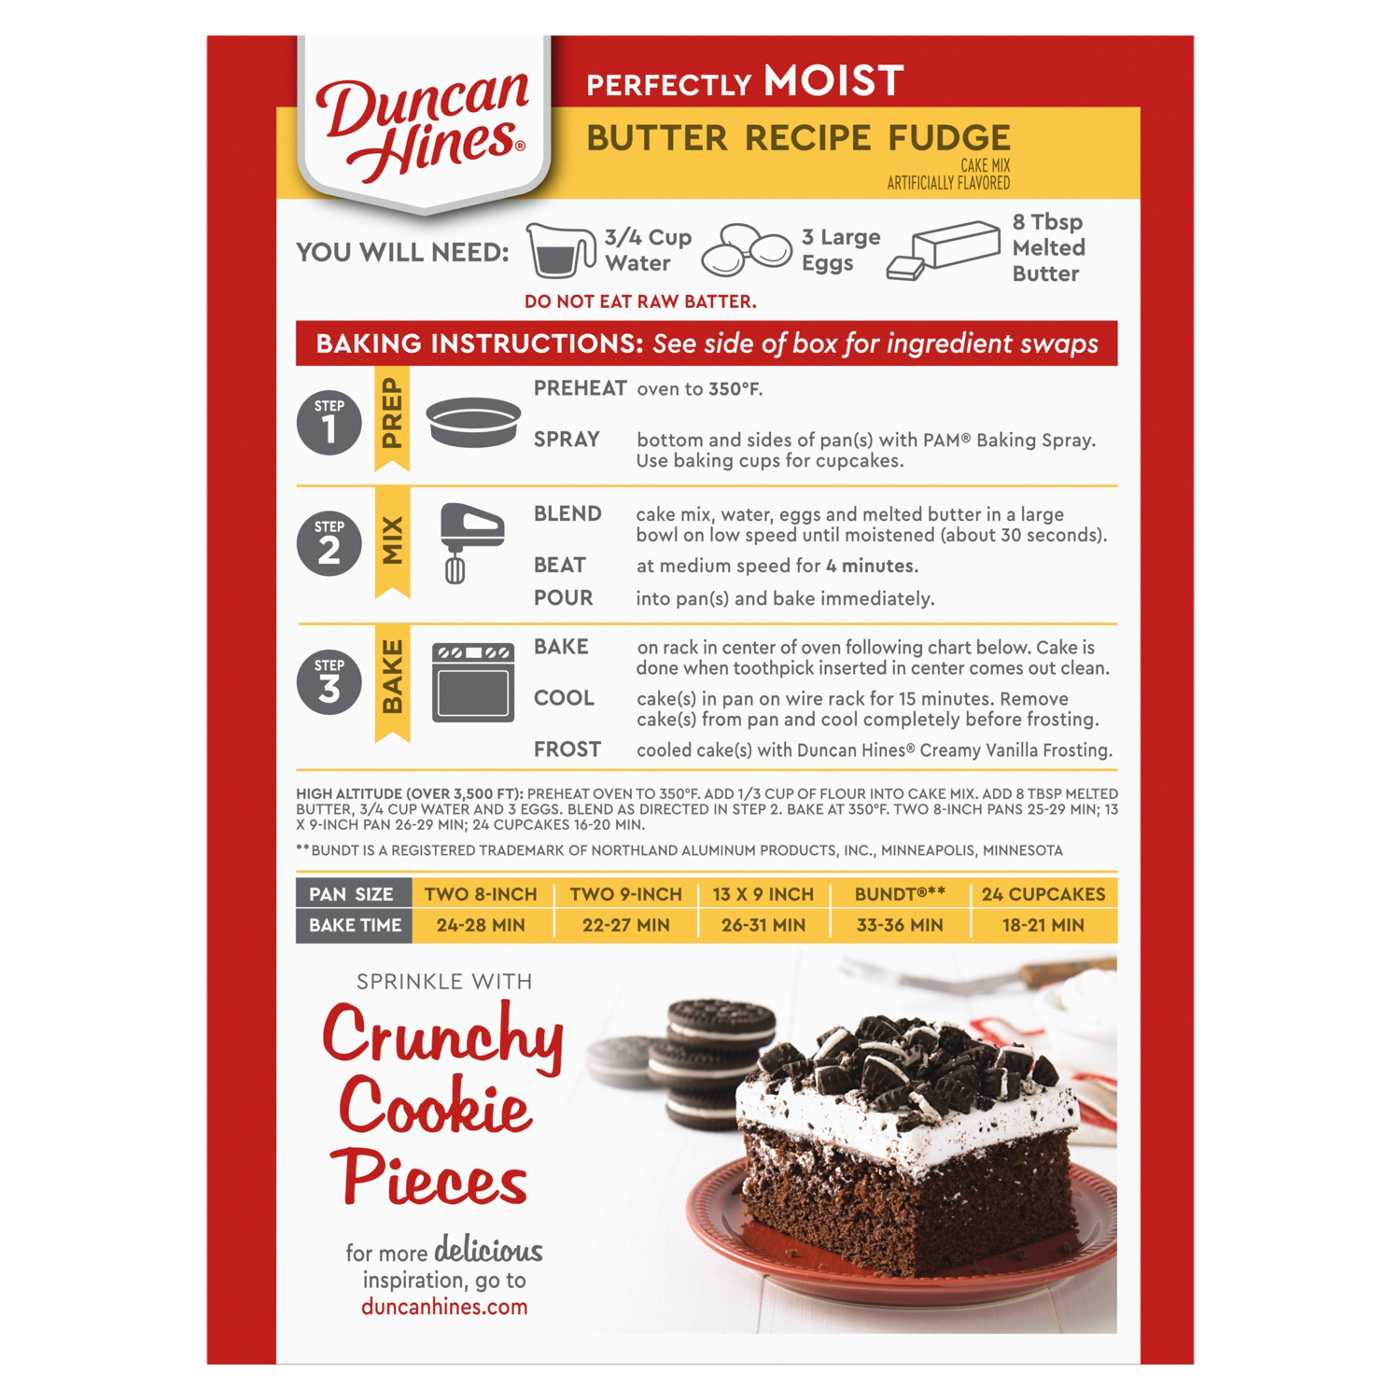 Duncan Hines Perfectly Moist Butter Recipe Fudge Cake Mix; image 4 of 7